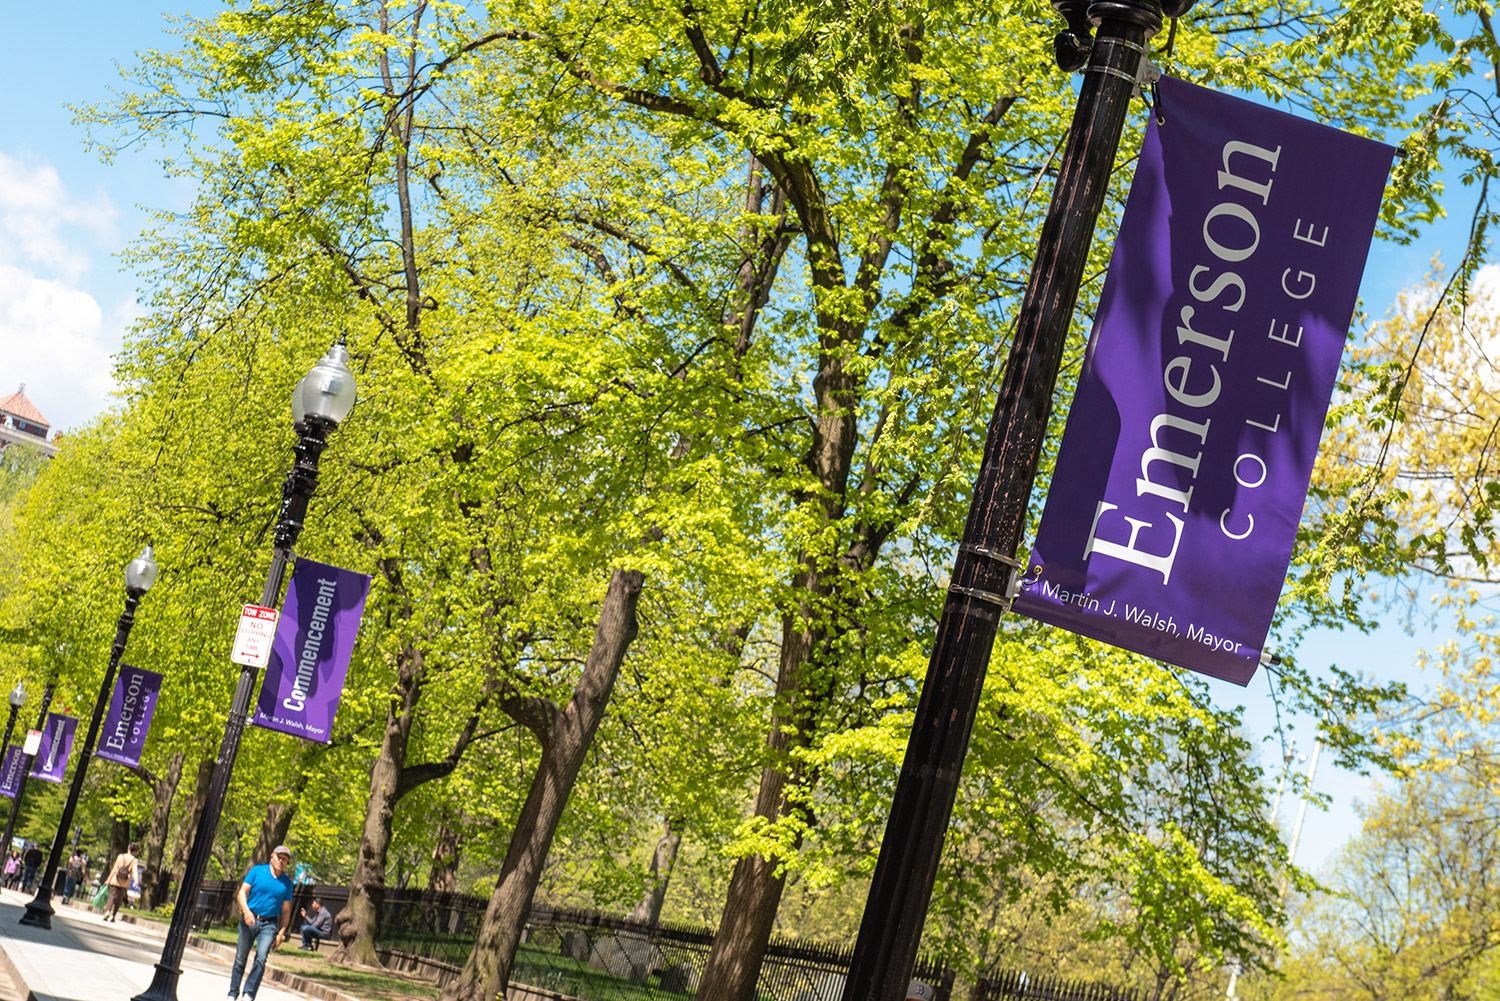 Purple Emerson banners hanging from poles on the street